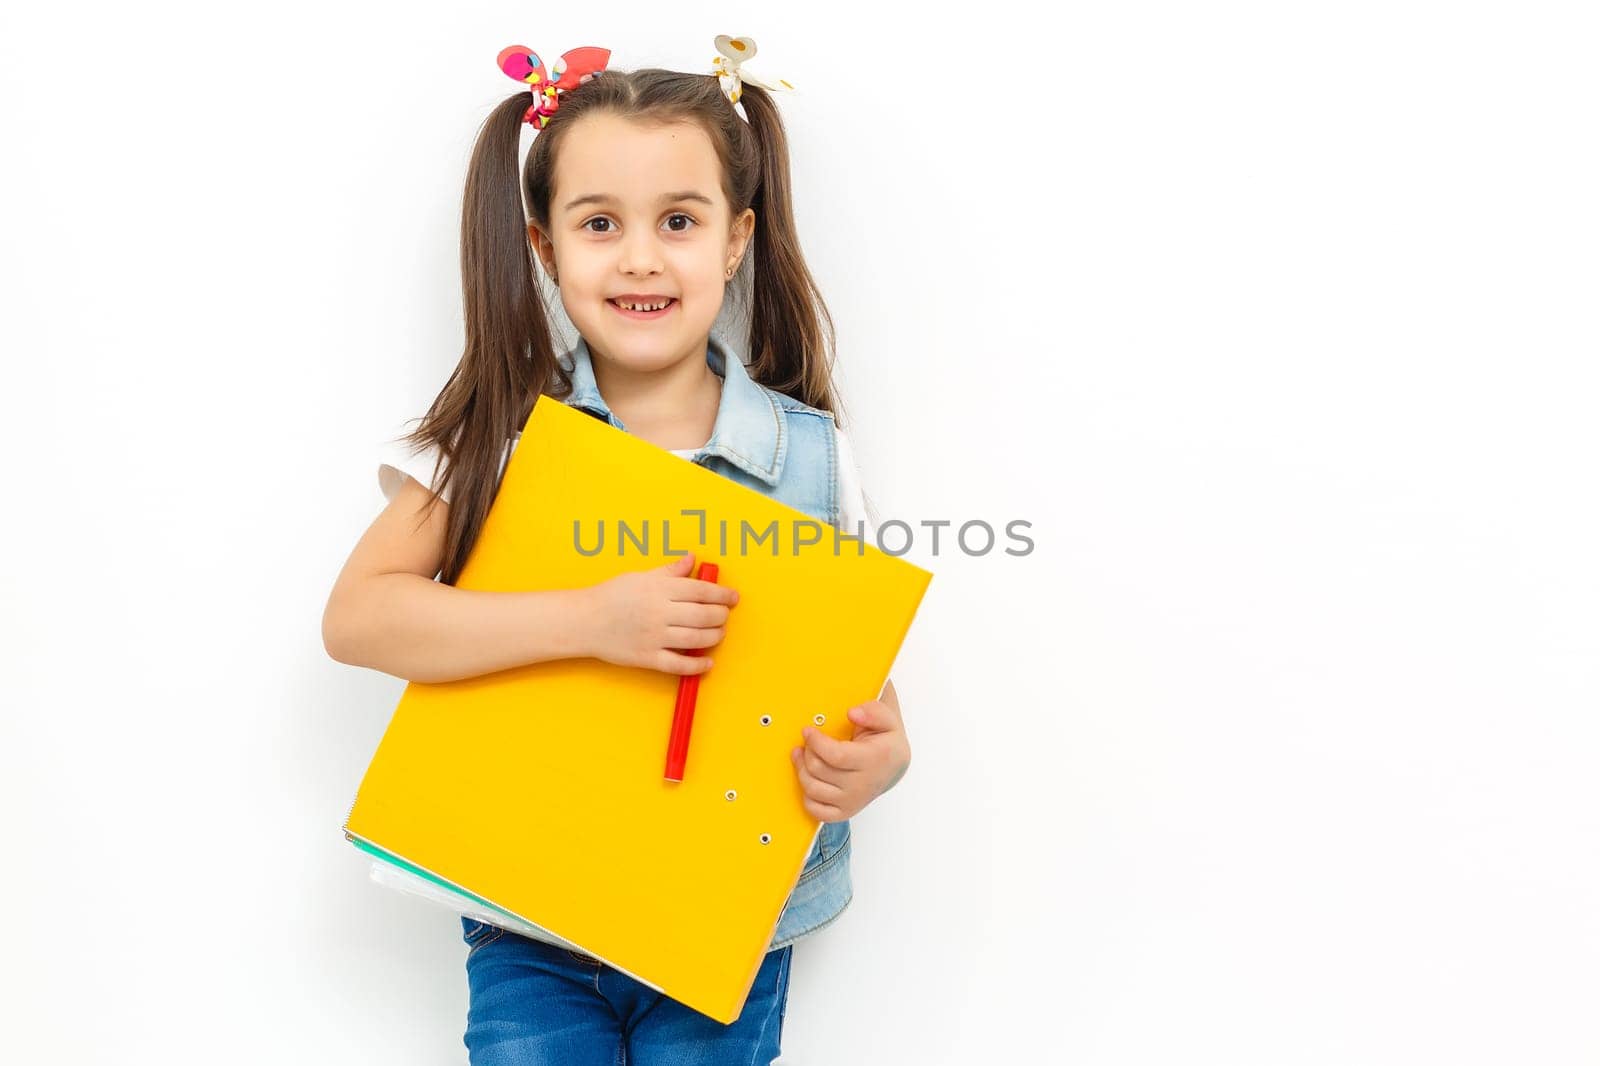 happy sweet little school girl carrying schoolbag backpack and books smiling in education and back to school concept isolated on white background